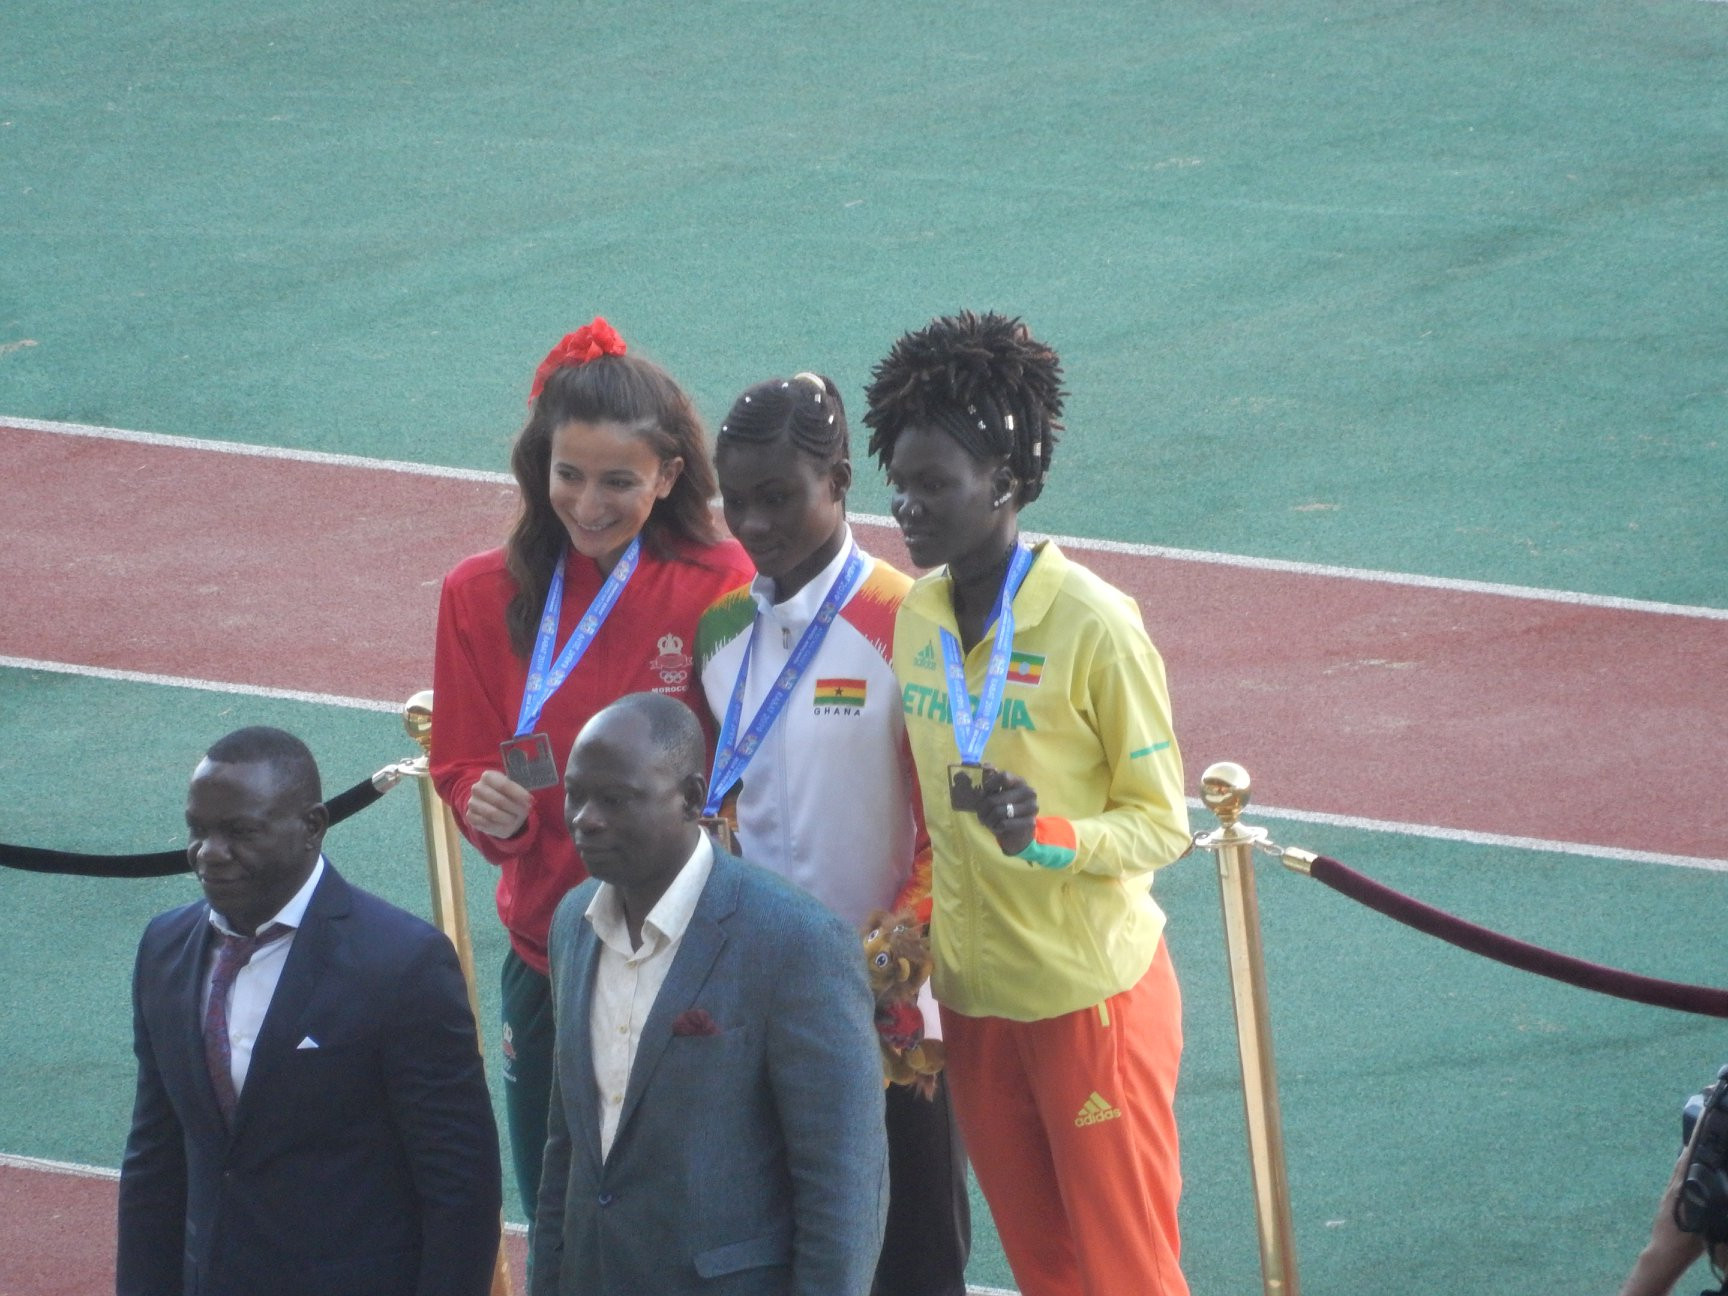 Rose Amoanimaa Yeboah, centre, won one of Ghana's two gold medals at the 2019 African Games in Rabat with victory in the women's high jump ©Facebook